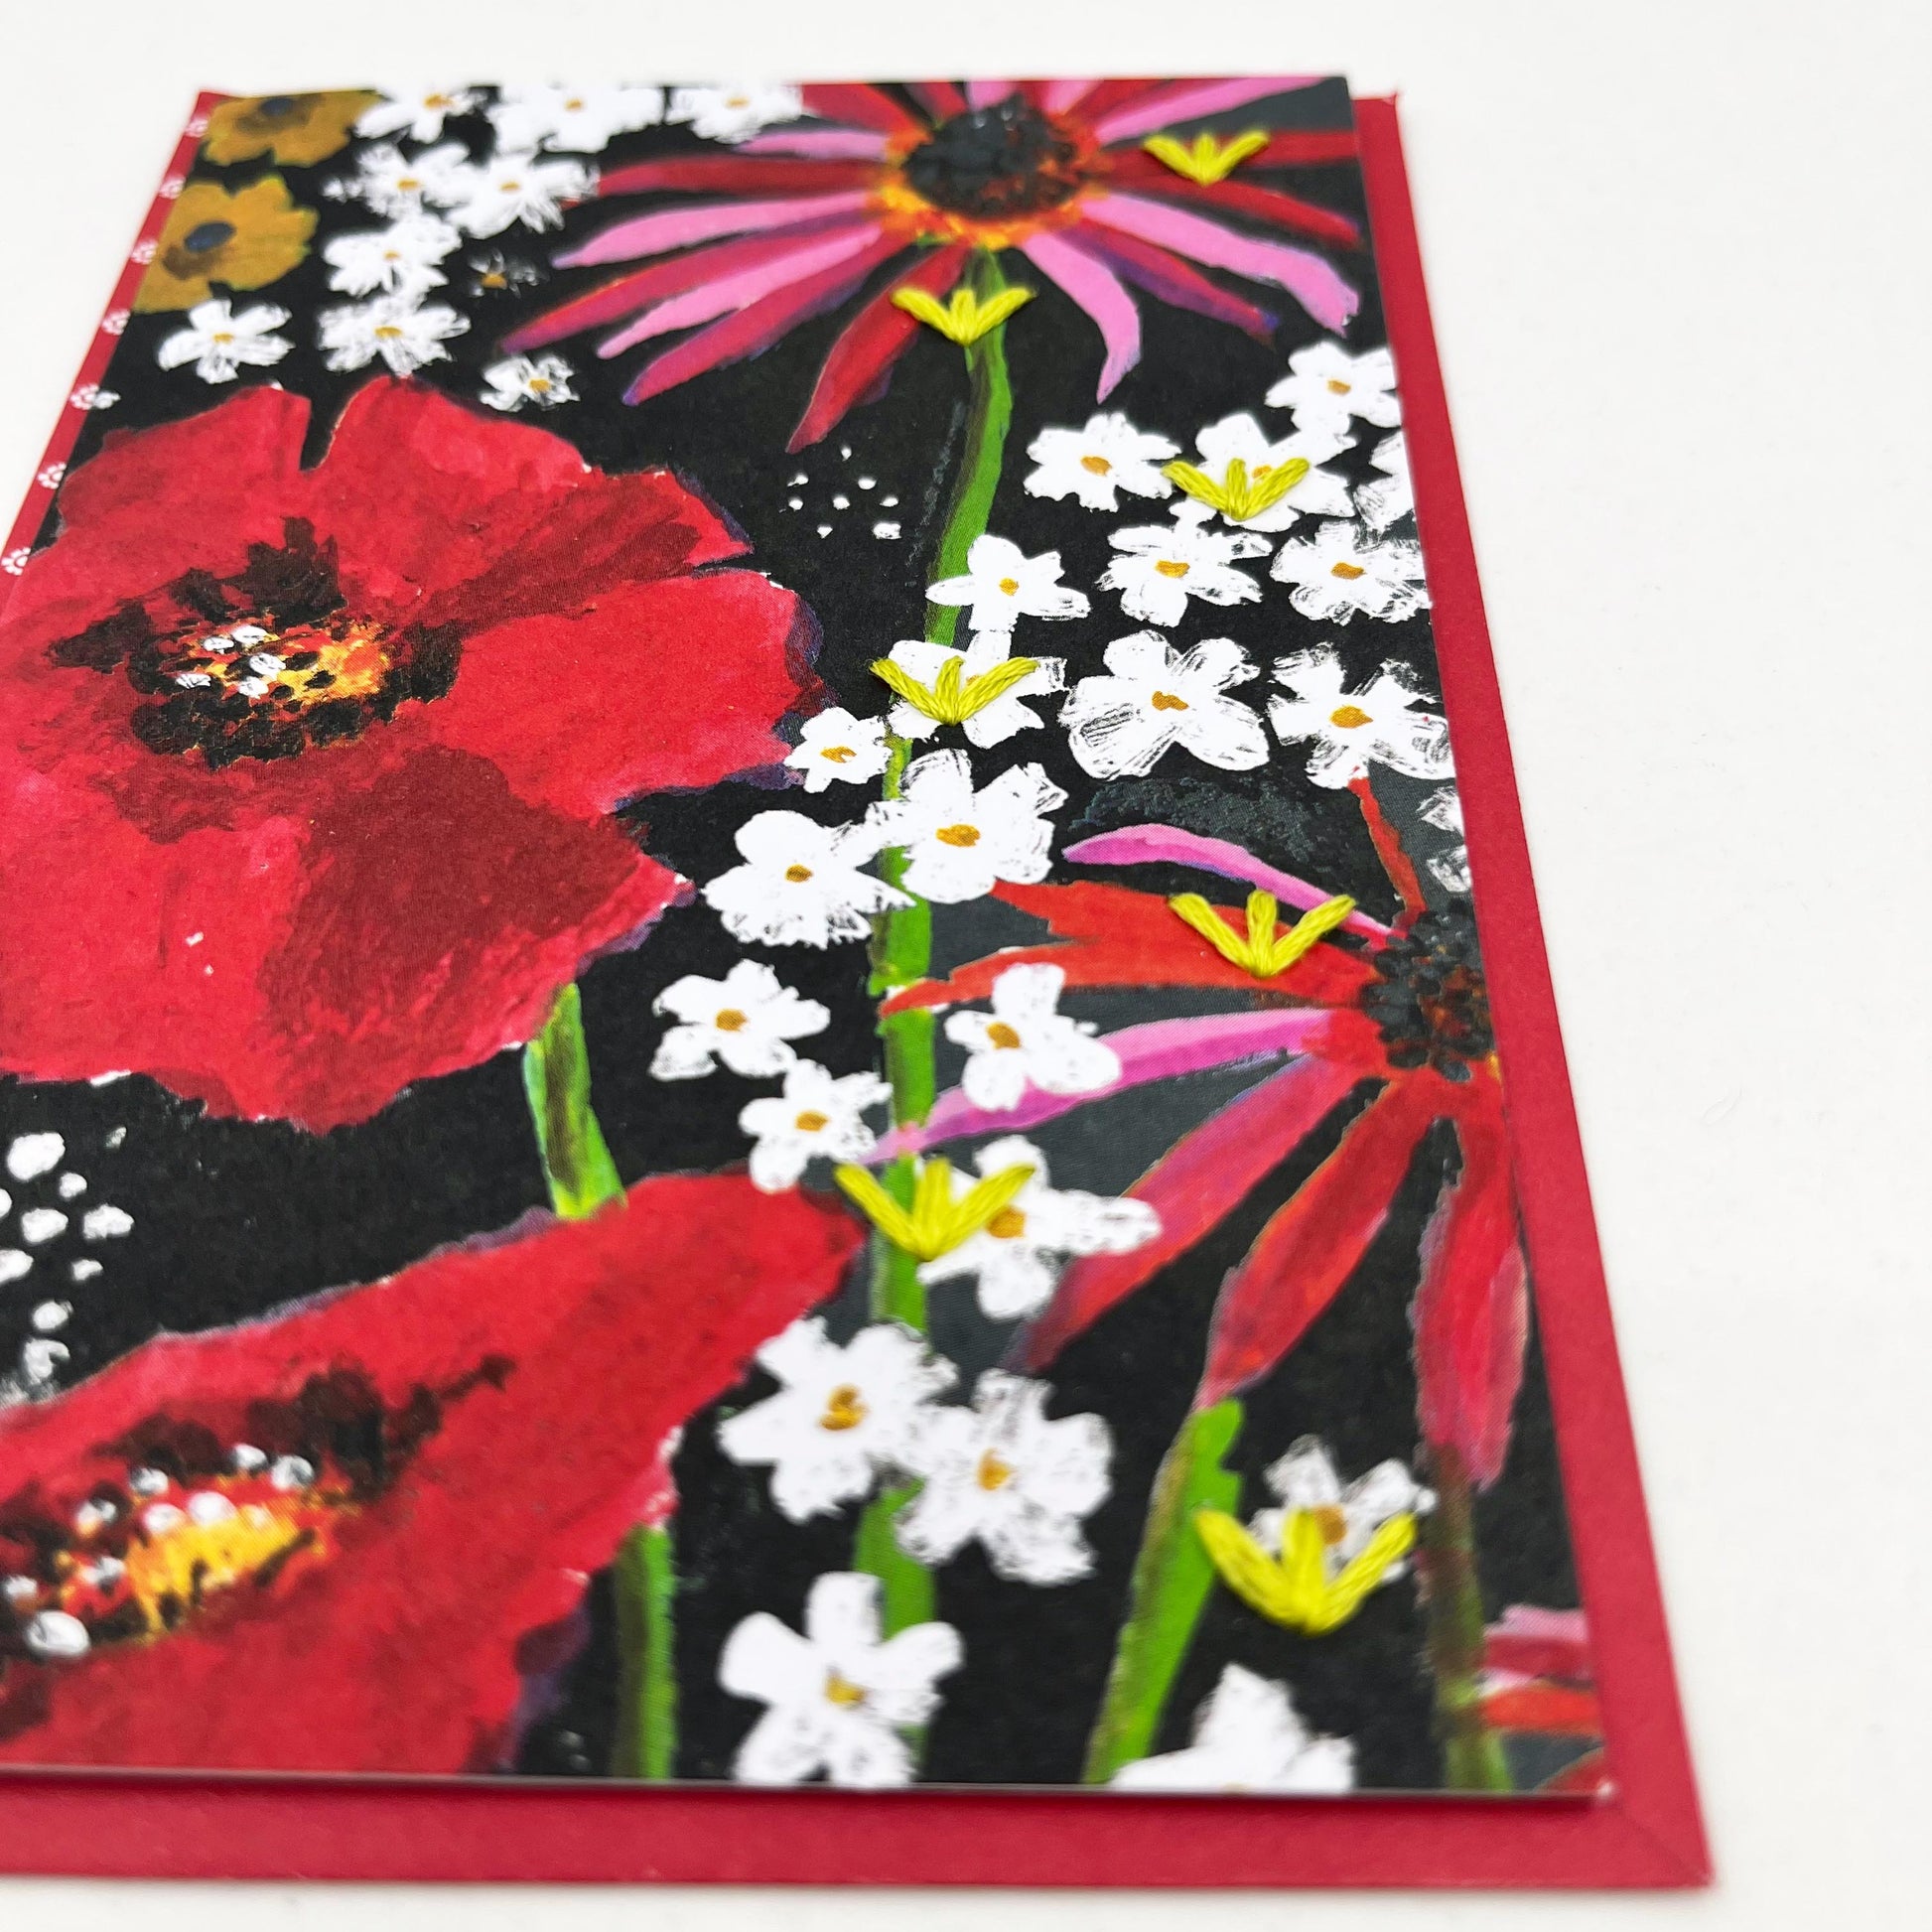 Greeting card standing flat on an envelope. artwork of painted flowers in red pink and white. Chartreuse stitches of sprout shapes in zig zag pattern on right side of card